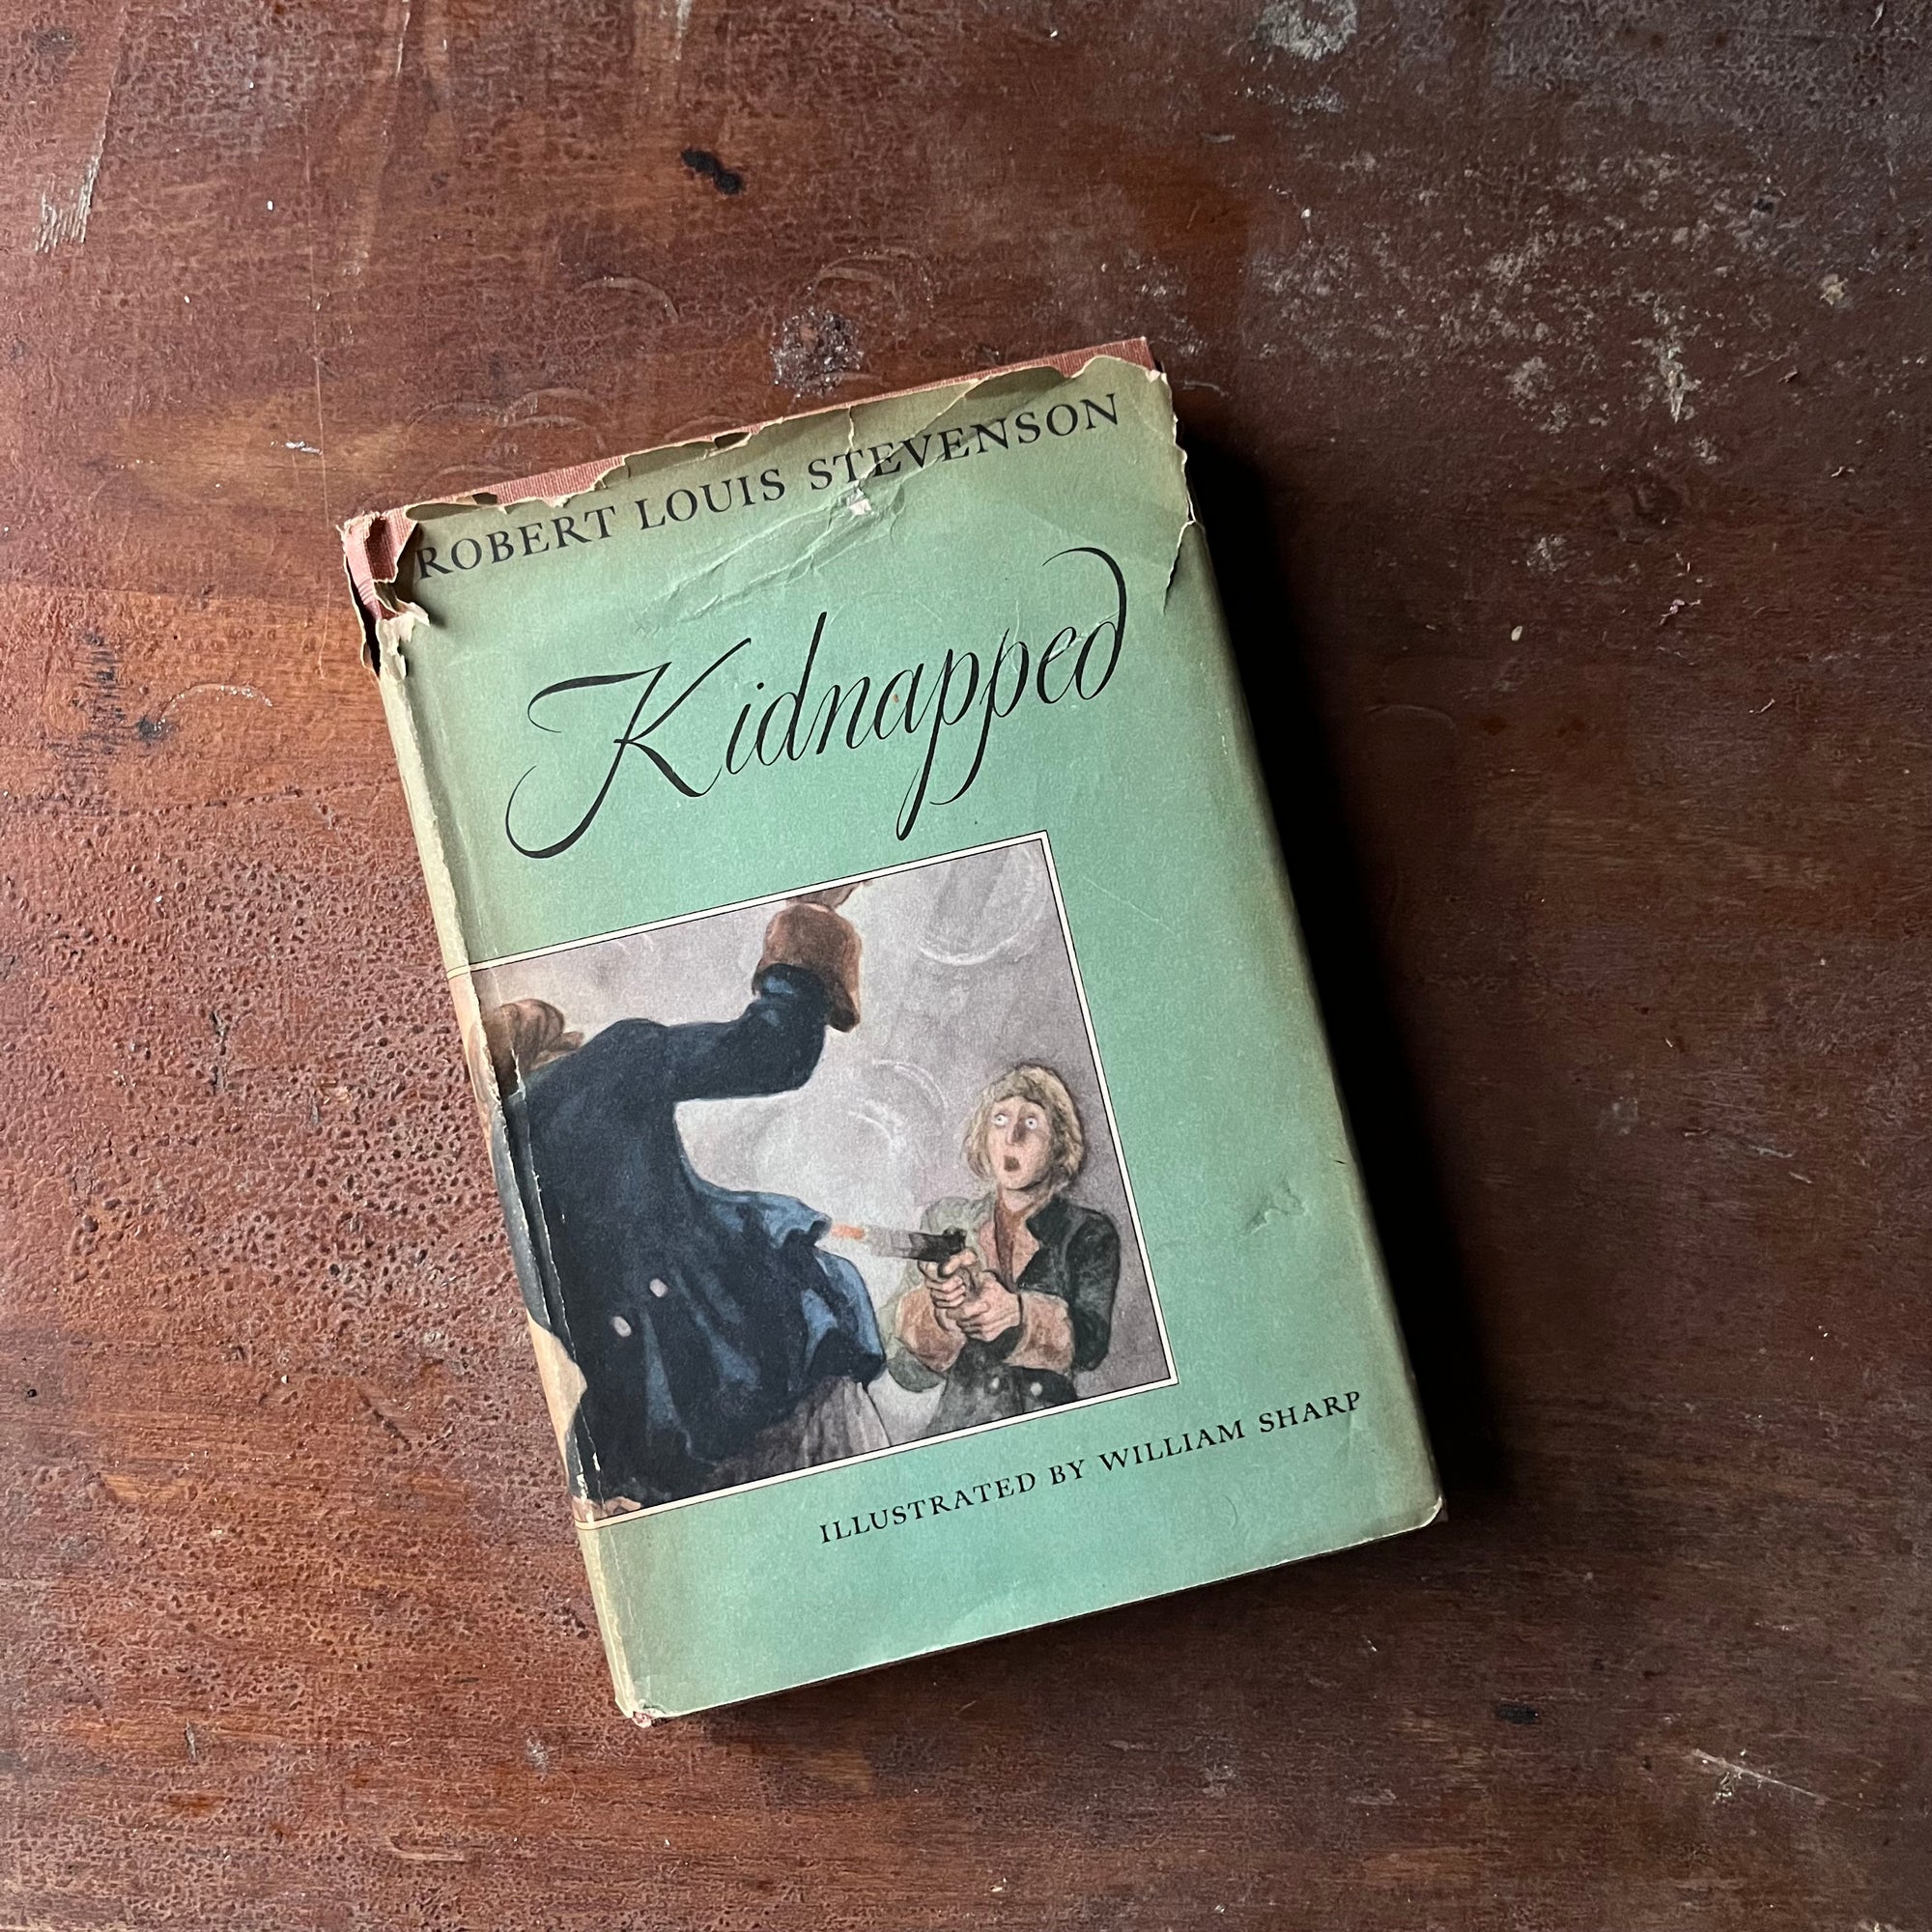 Log Cabin Vintage – vintage children’s book, children’s book, chapter book – Kidnapped by Robert Louis Stevenson with illustrations by William Sharp - a 1949 Edition - view of the dust jacket's front cover